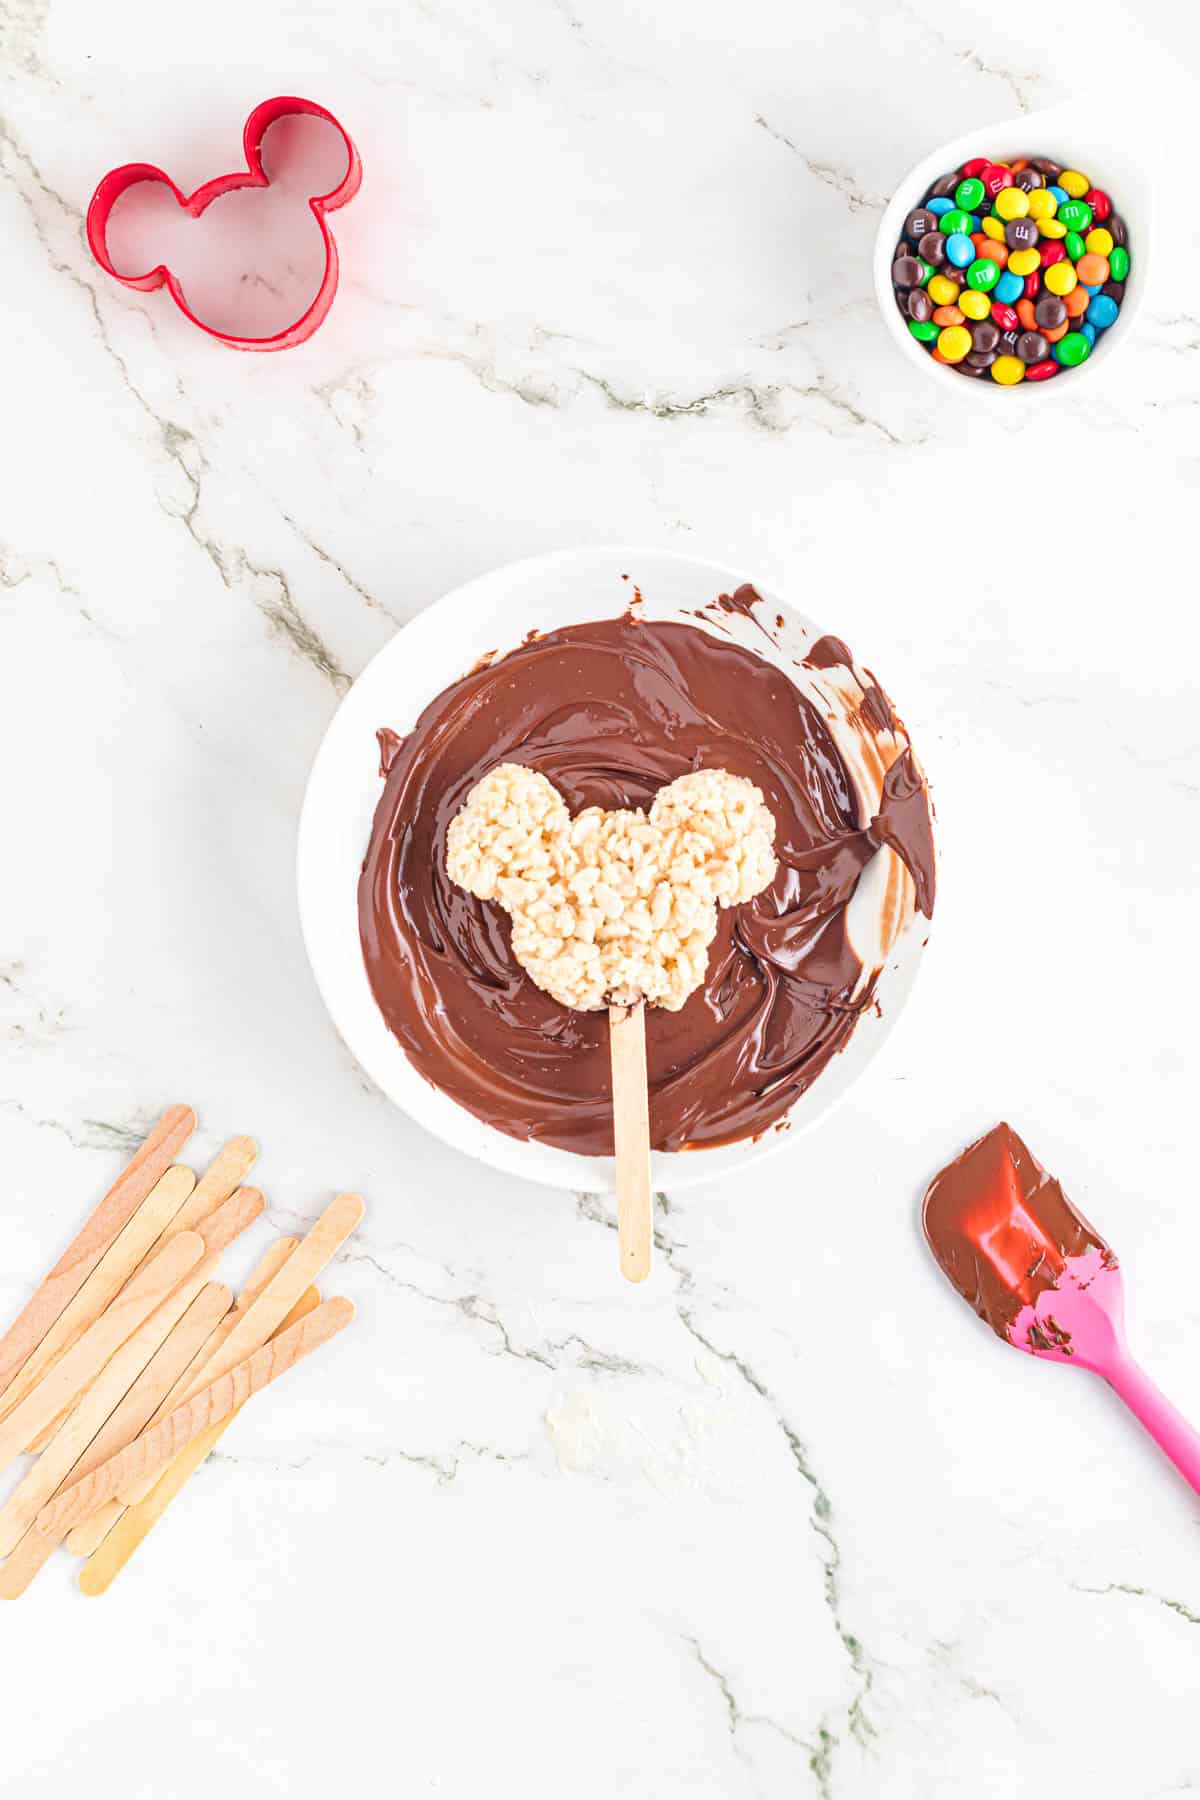 Dipping Mickey-shaped rice krispies treats into melted chocolate.